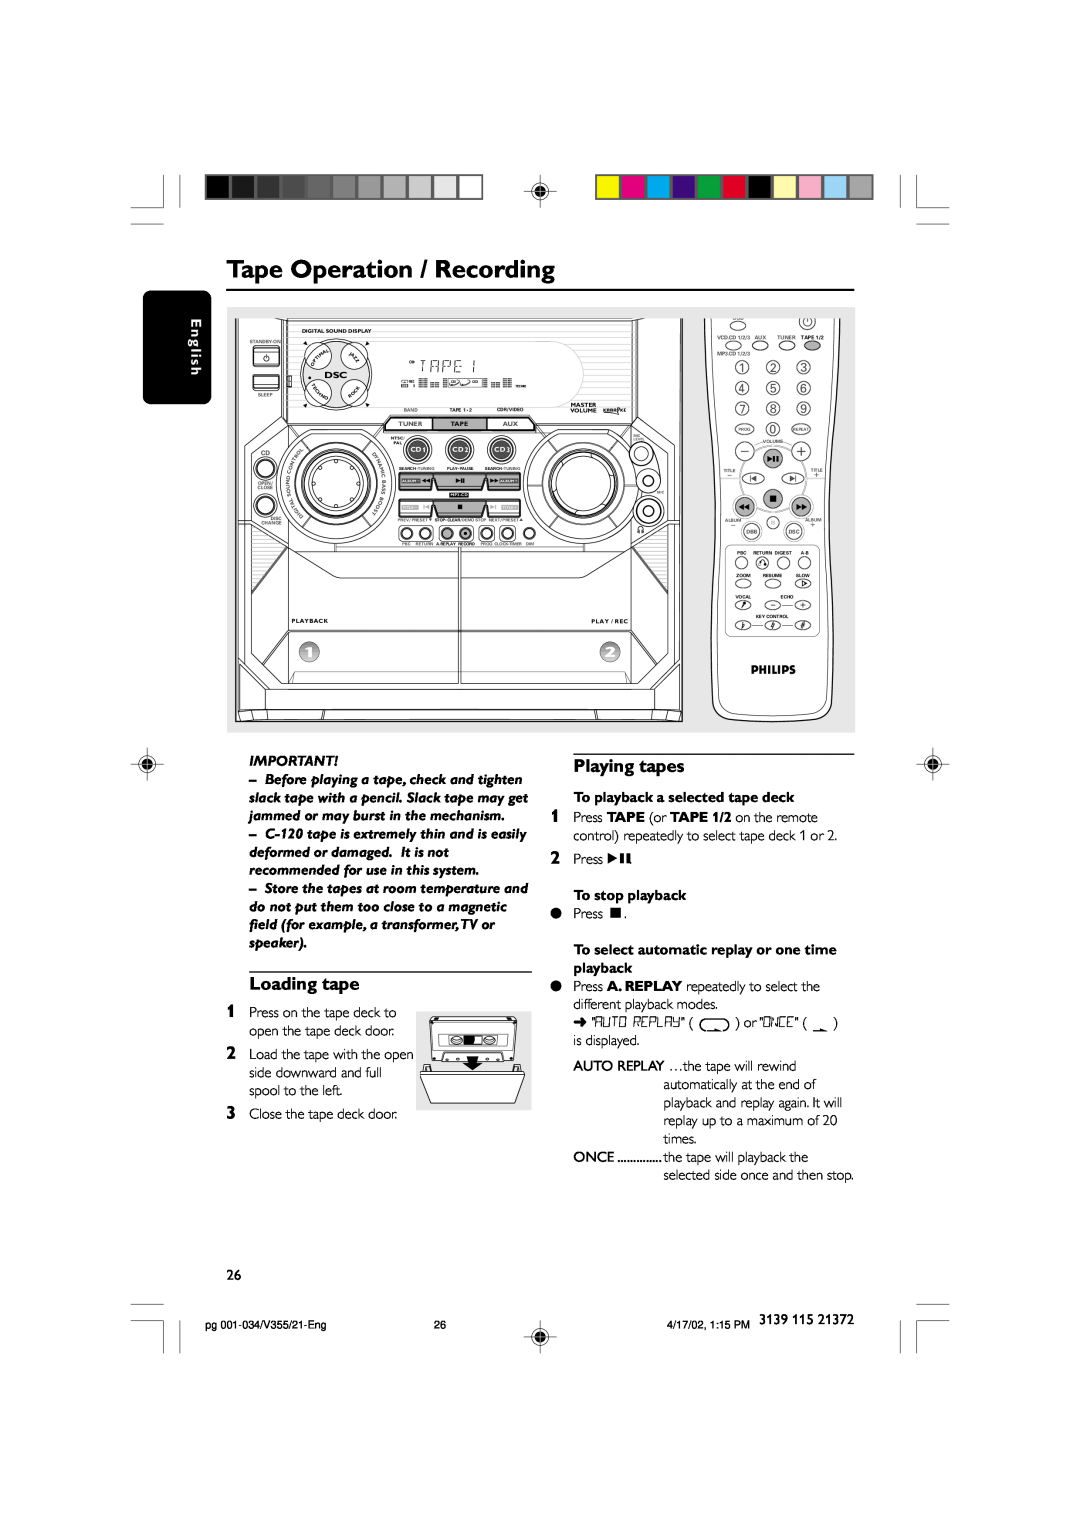 Philips FW-V355 manual Tape Operation / Recording, l i s h, To playback a selected tape deck, To stop playback, E n g, Ç àá 